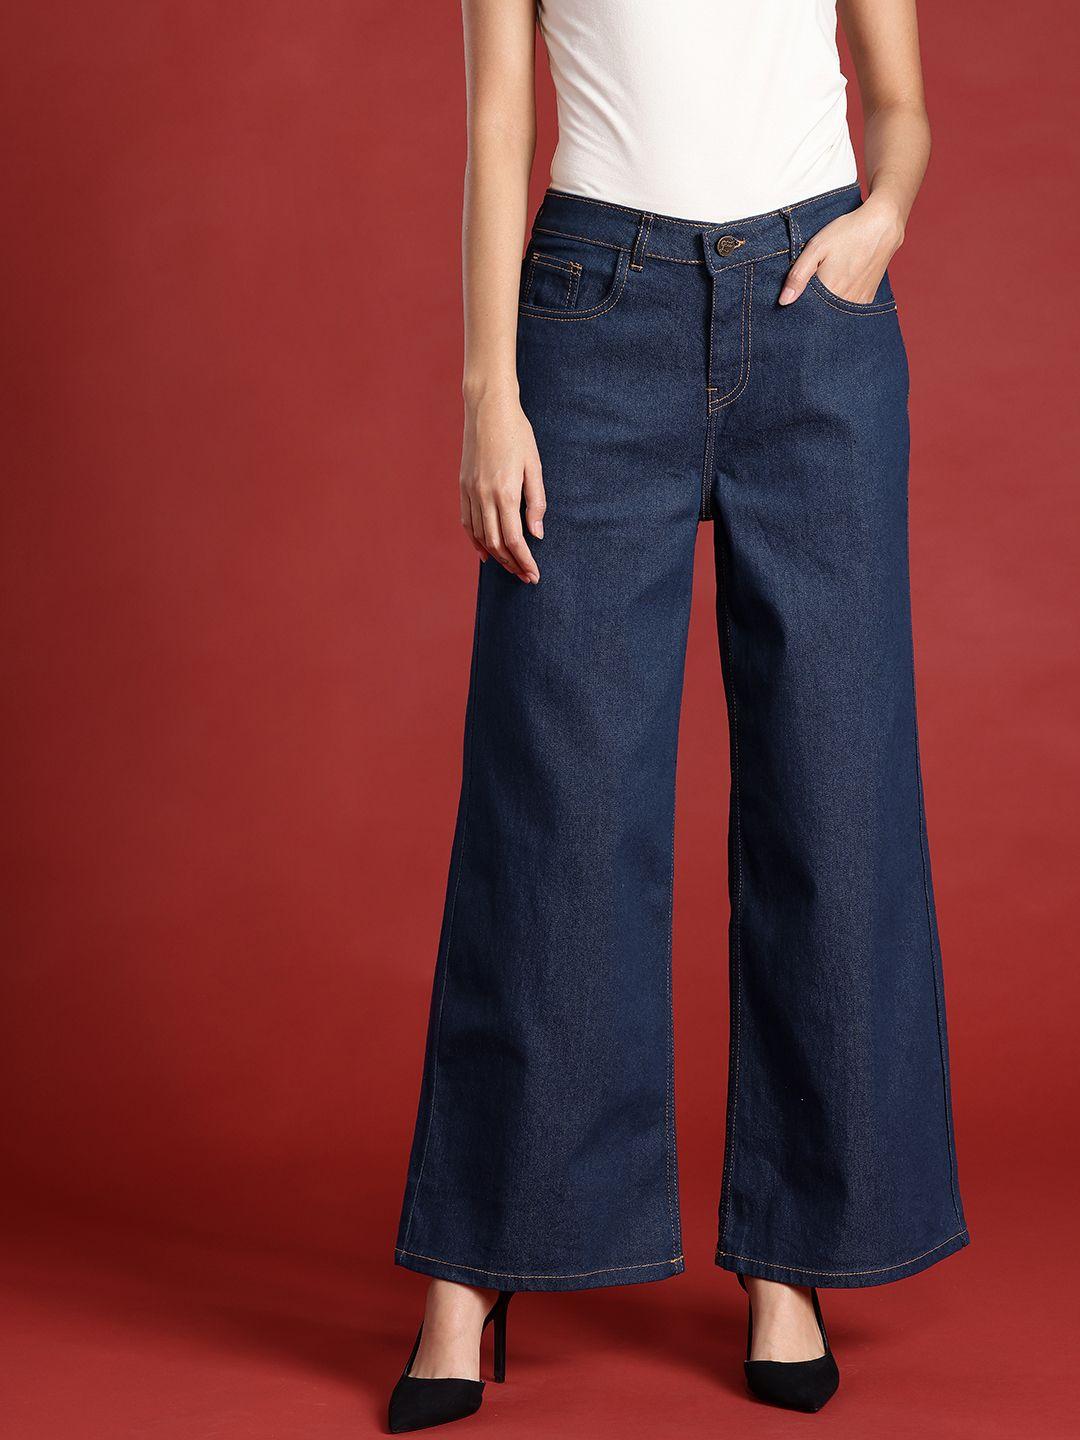 all about you Women Wide Leg Stretchable Jeans